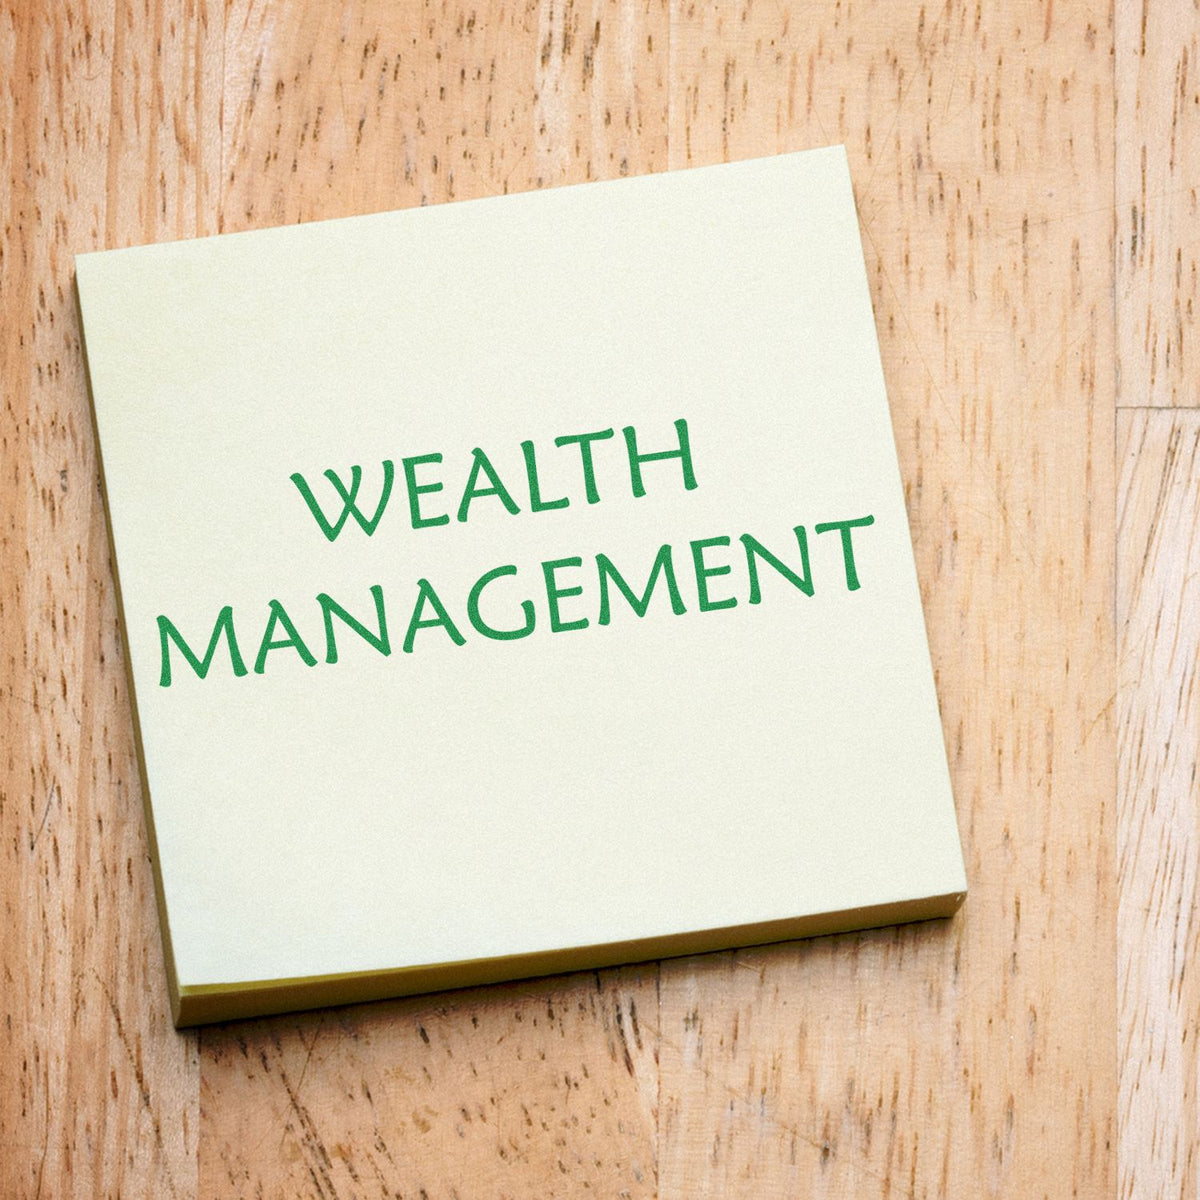 Slim Pre-Inked Wealth Management Stamp In Use